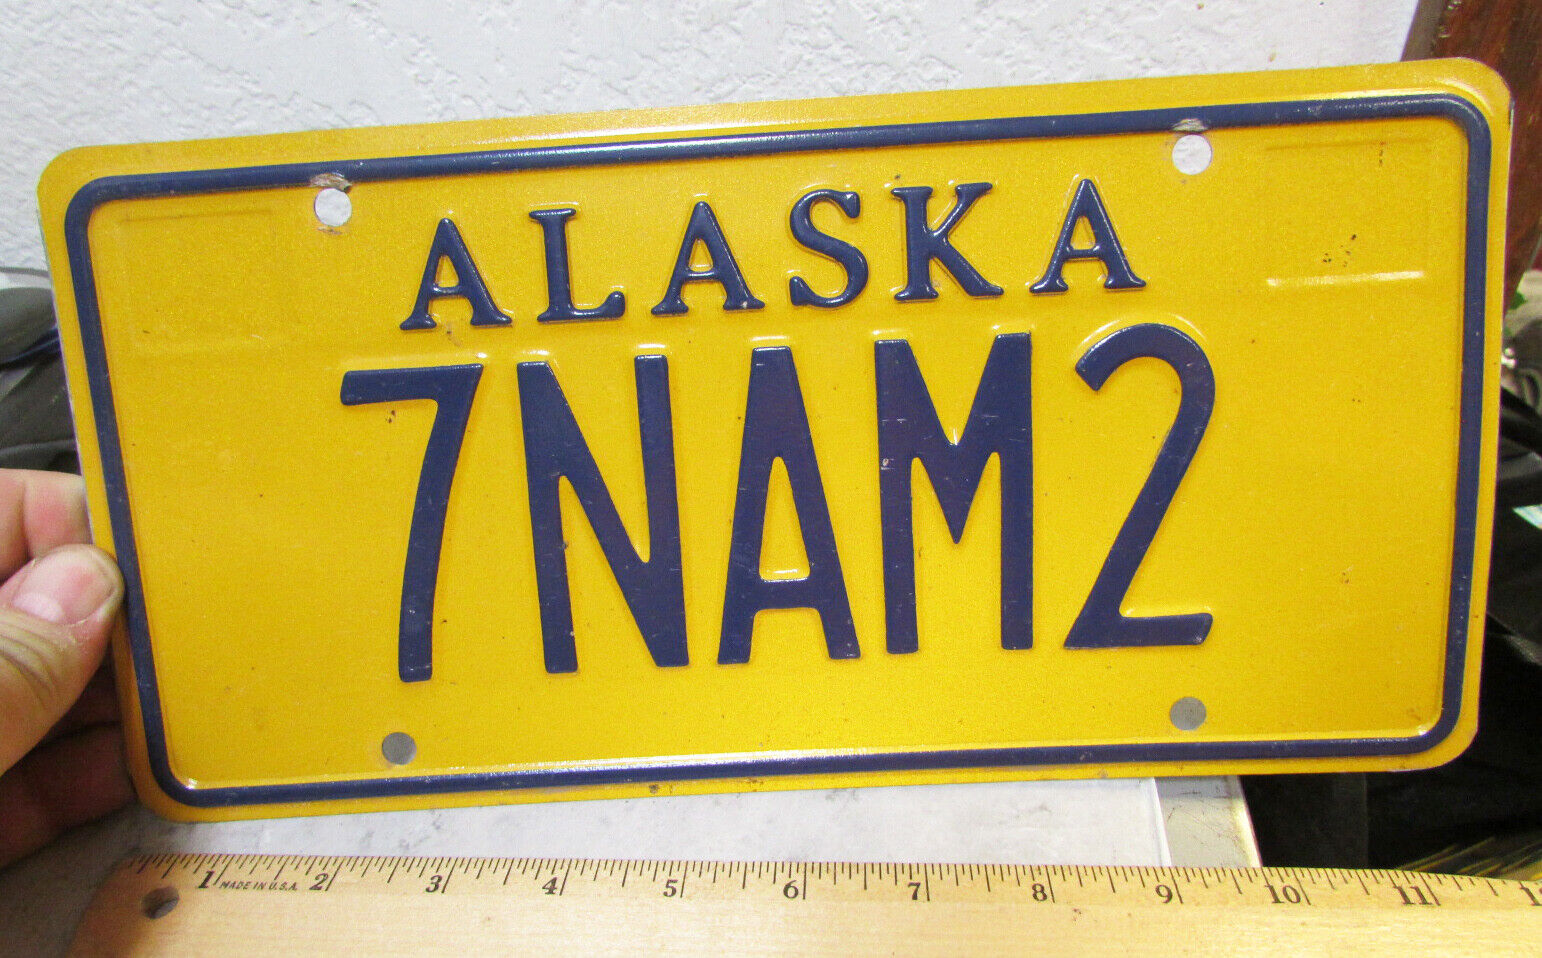 Alaska License Plate Gold Style, 7nam2, 1980s Issue, Expired 2010, Hard 2 Find